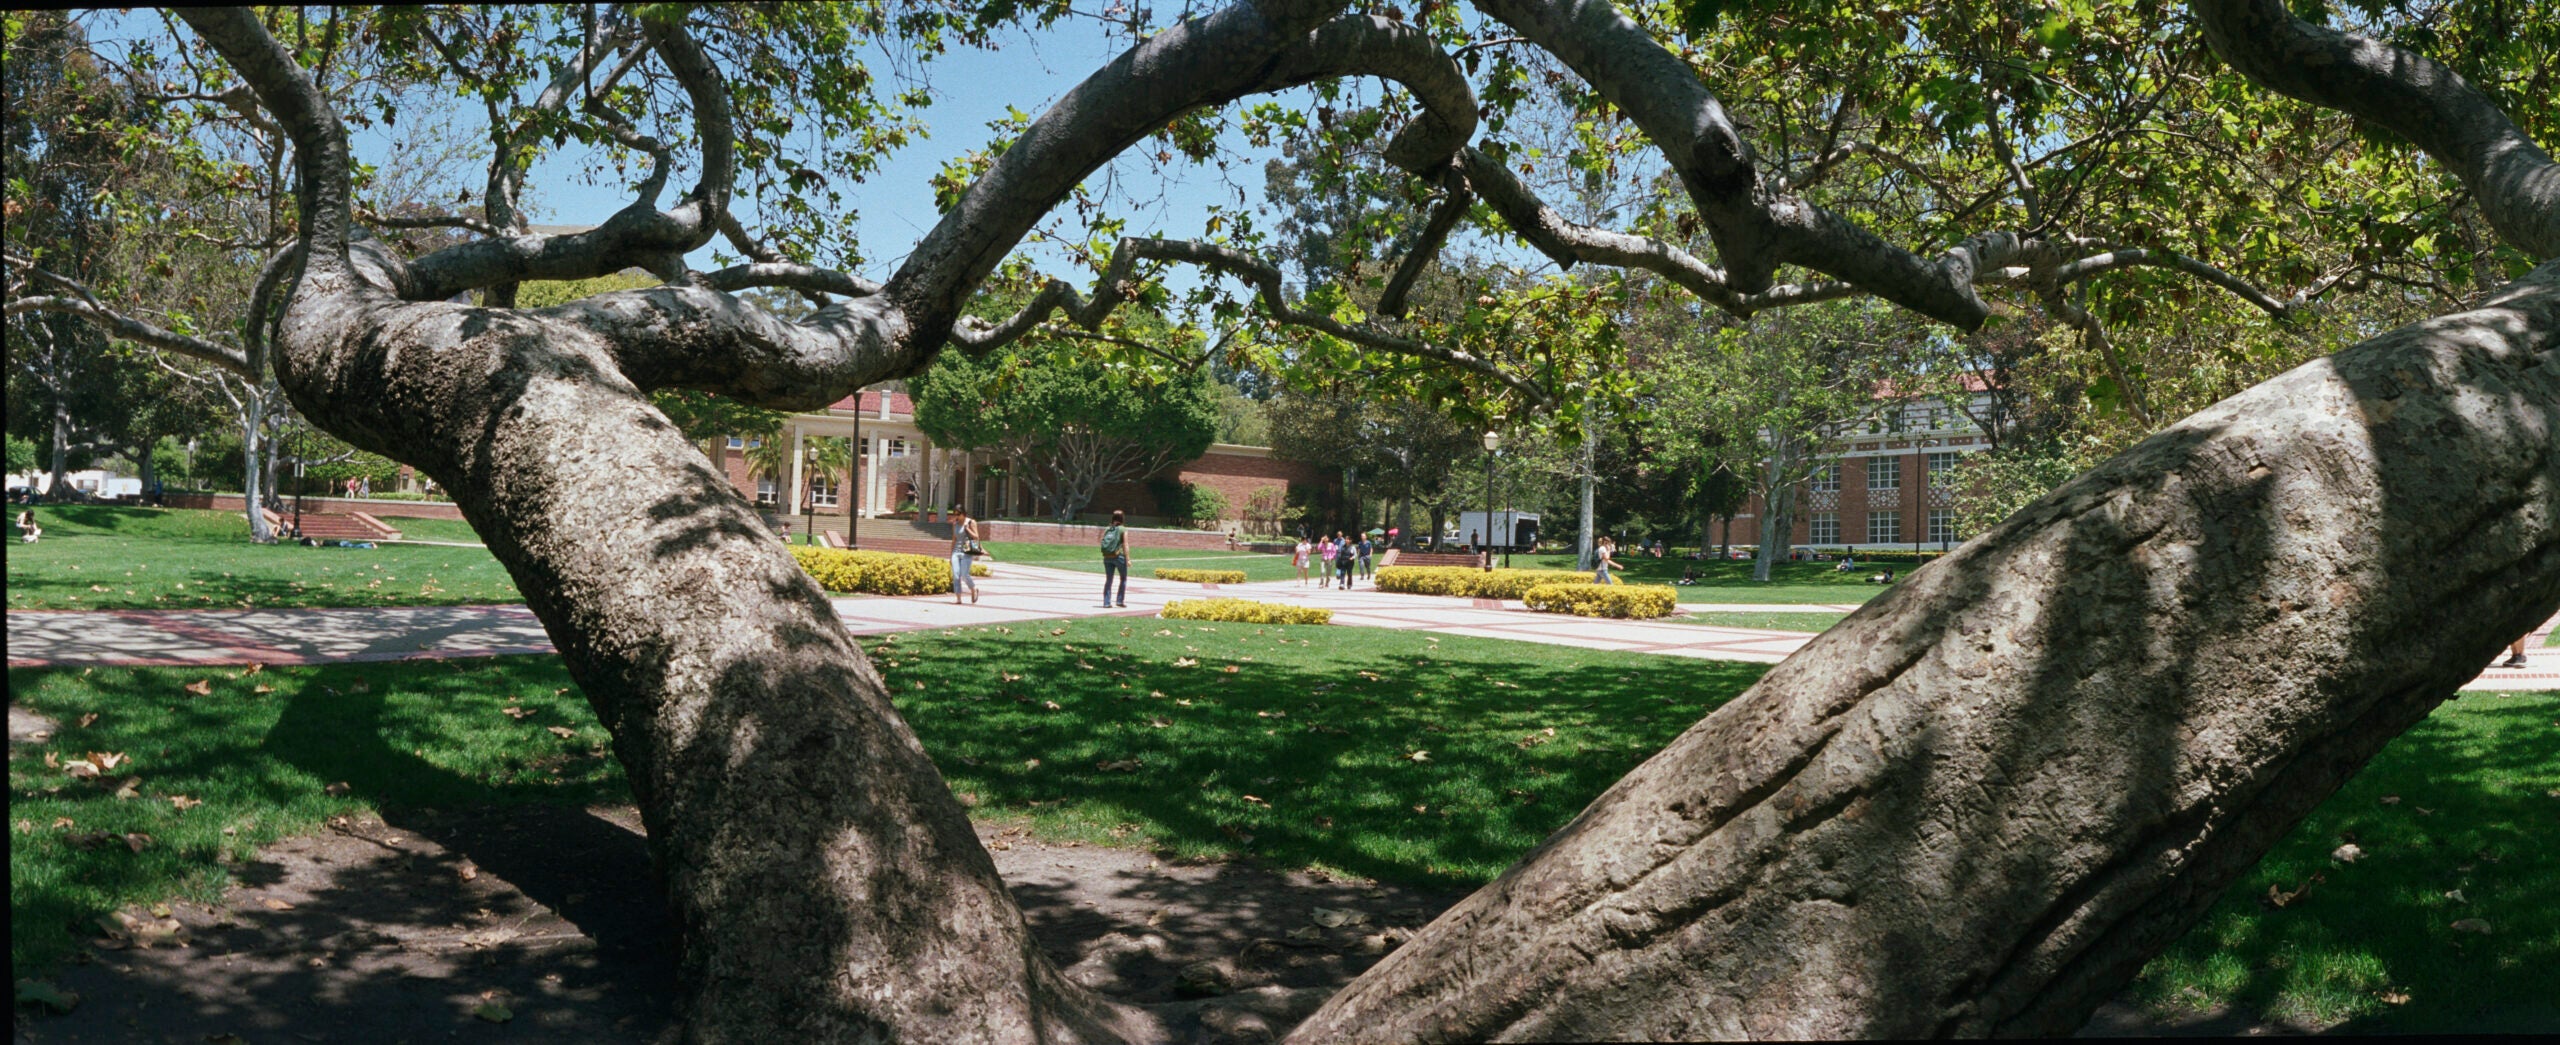 ucla dickson court view with large tree branches in foreground